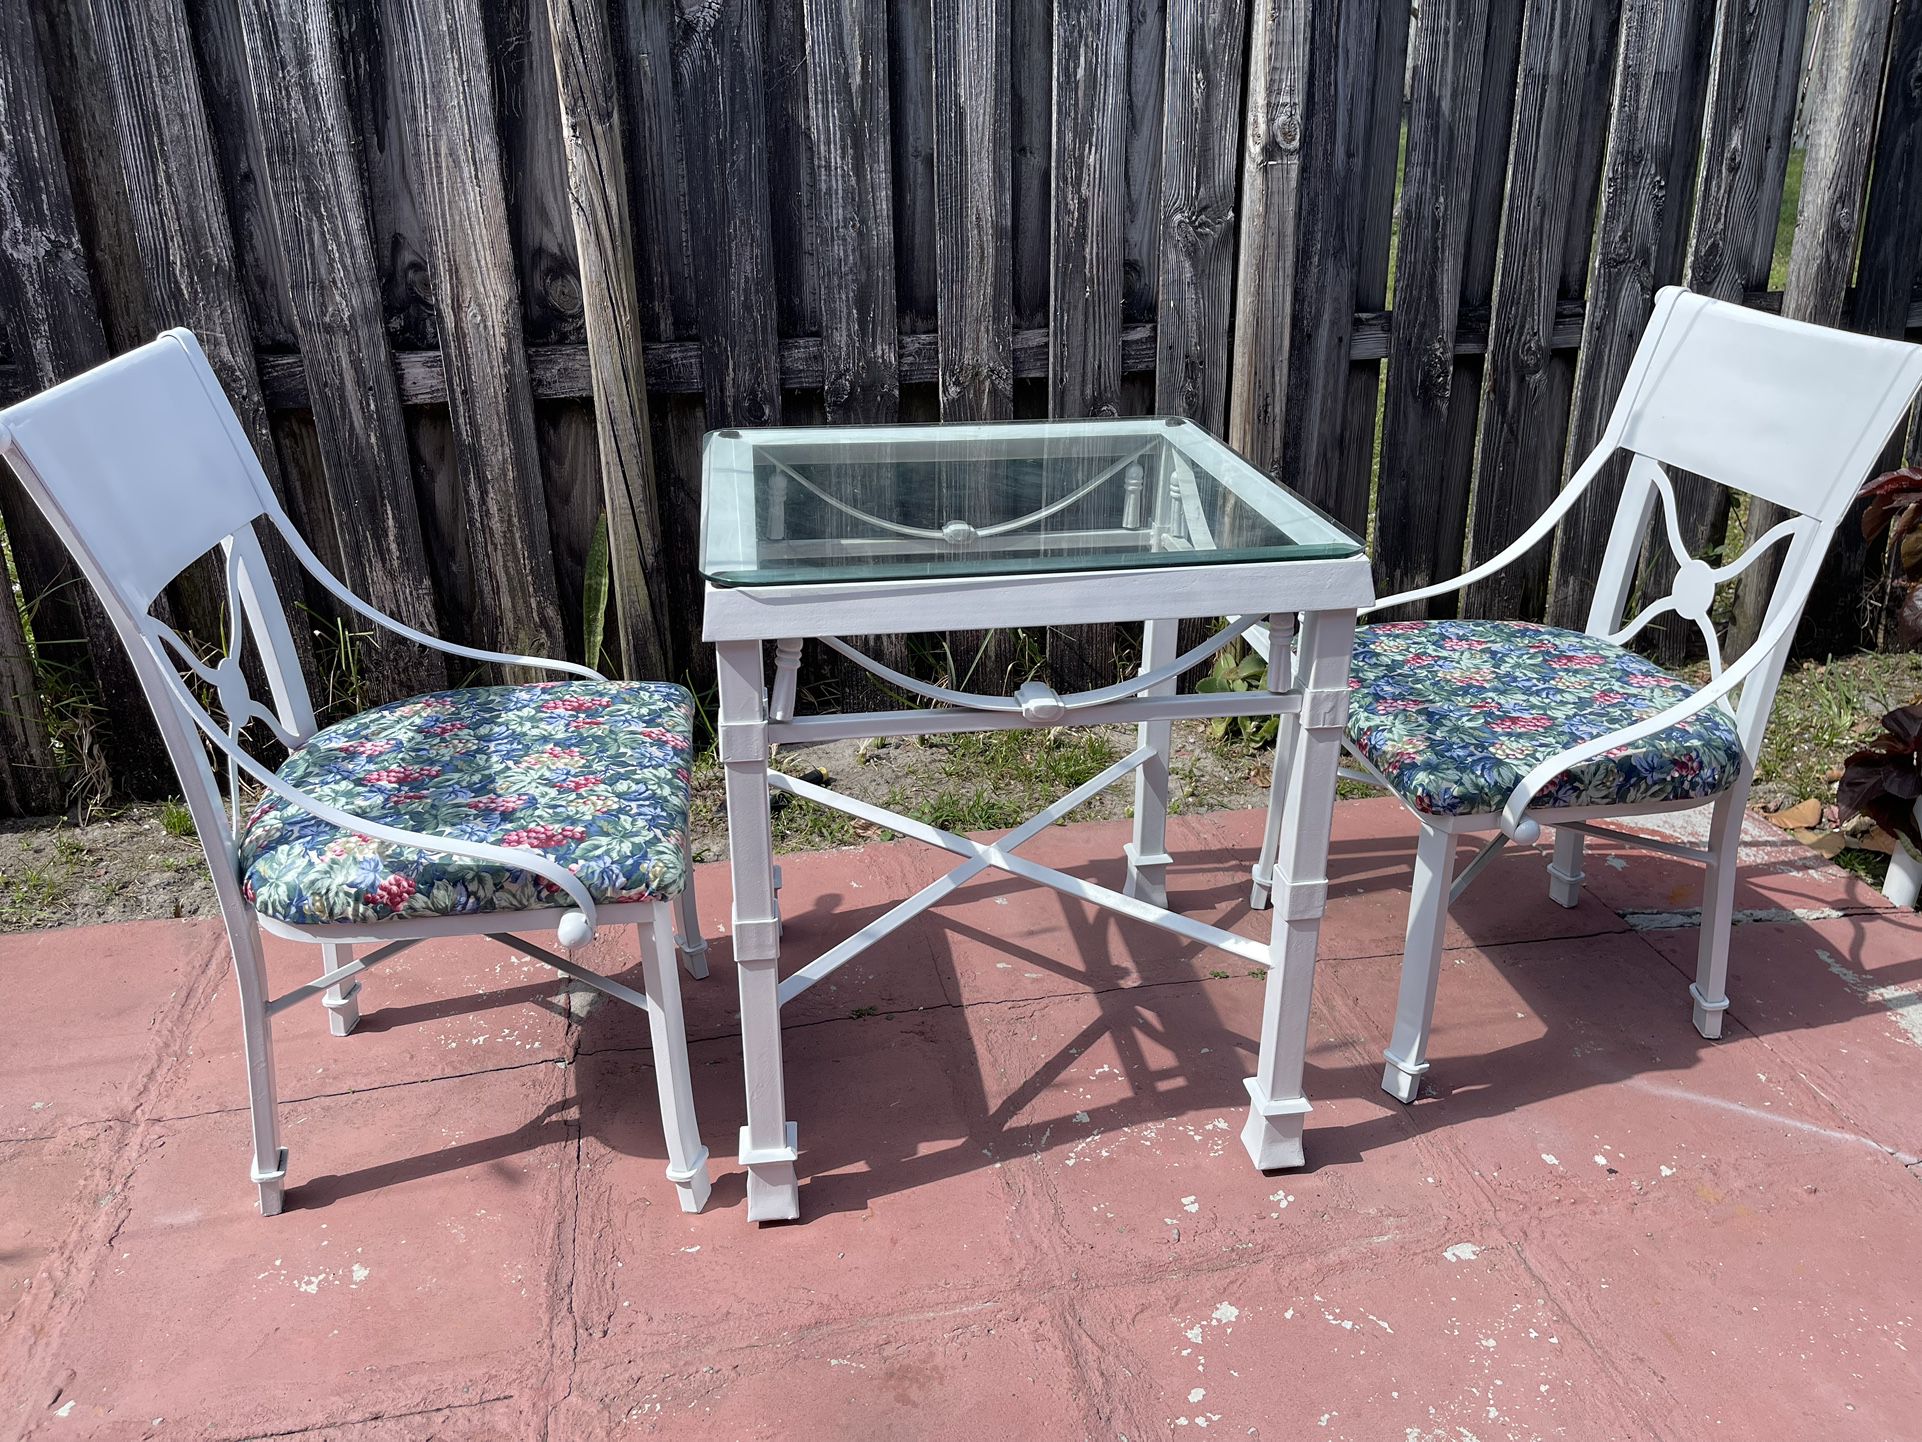 Metal Dining Set 2 Chairs And Small Table 30”H X 26” X 26” Good Condition $100 Firm On Price